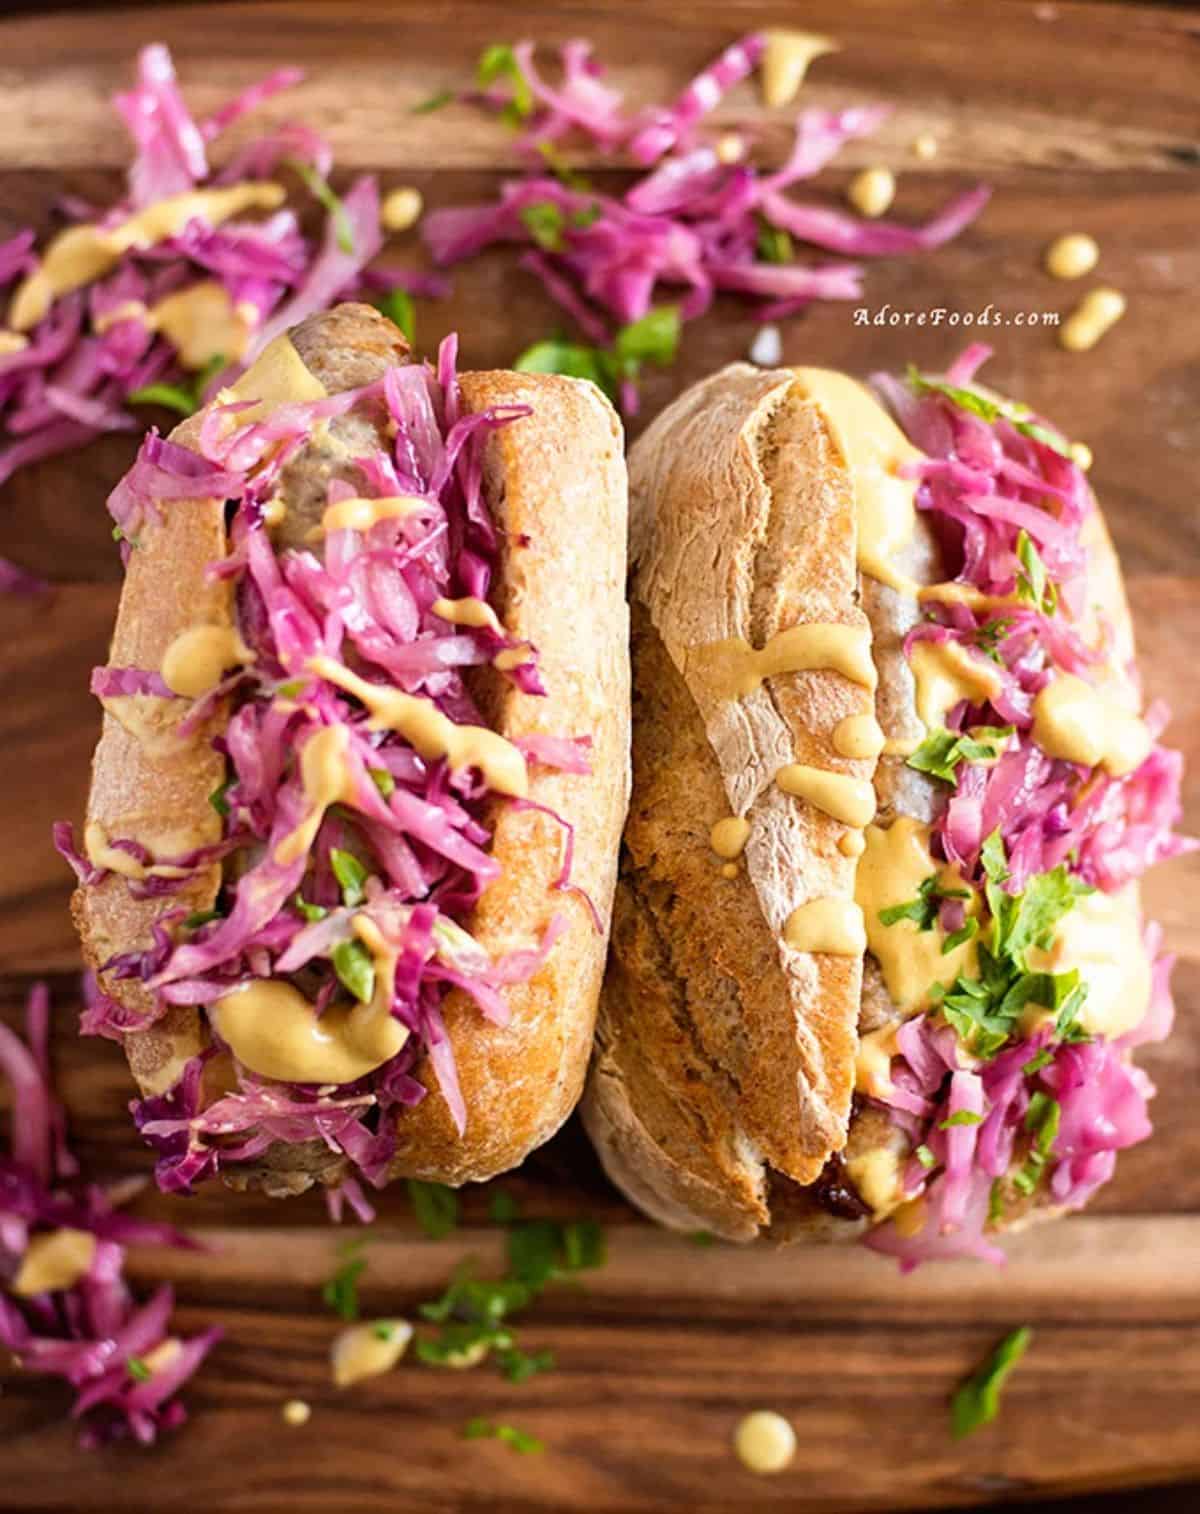 Two German Bratwurst Hot Dogs With Red Cabbage Sauerkraut on a wooden table.